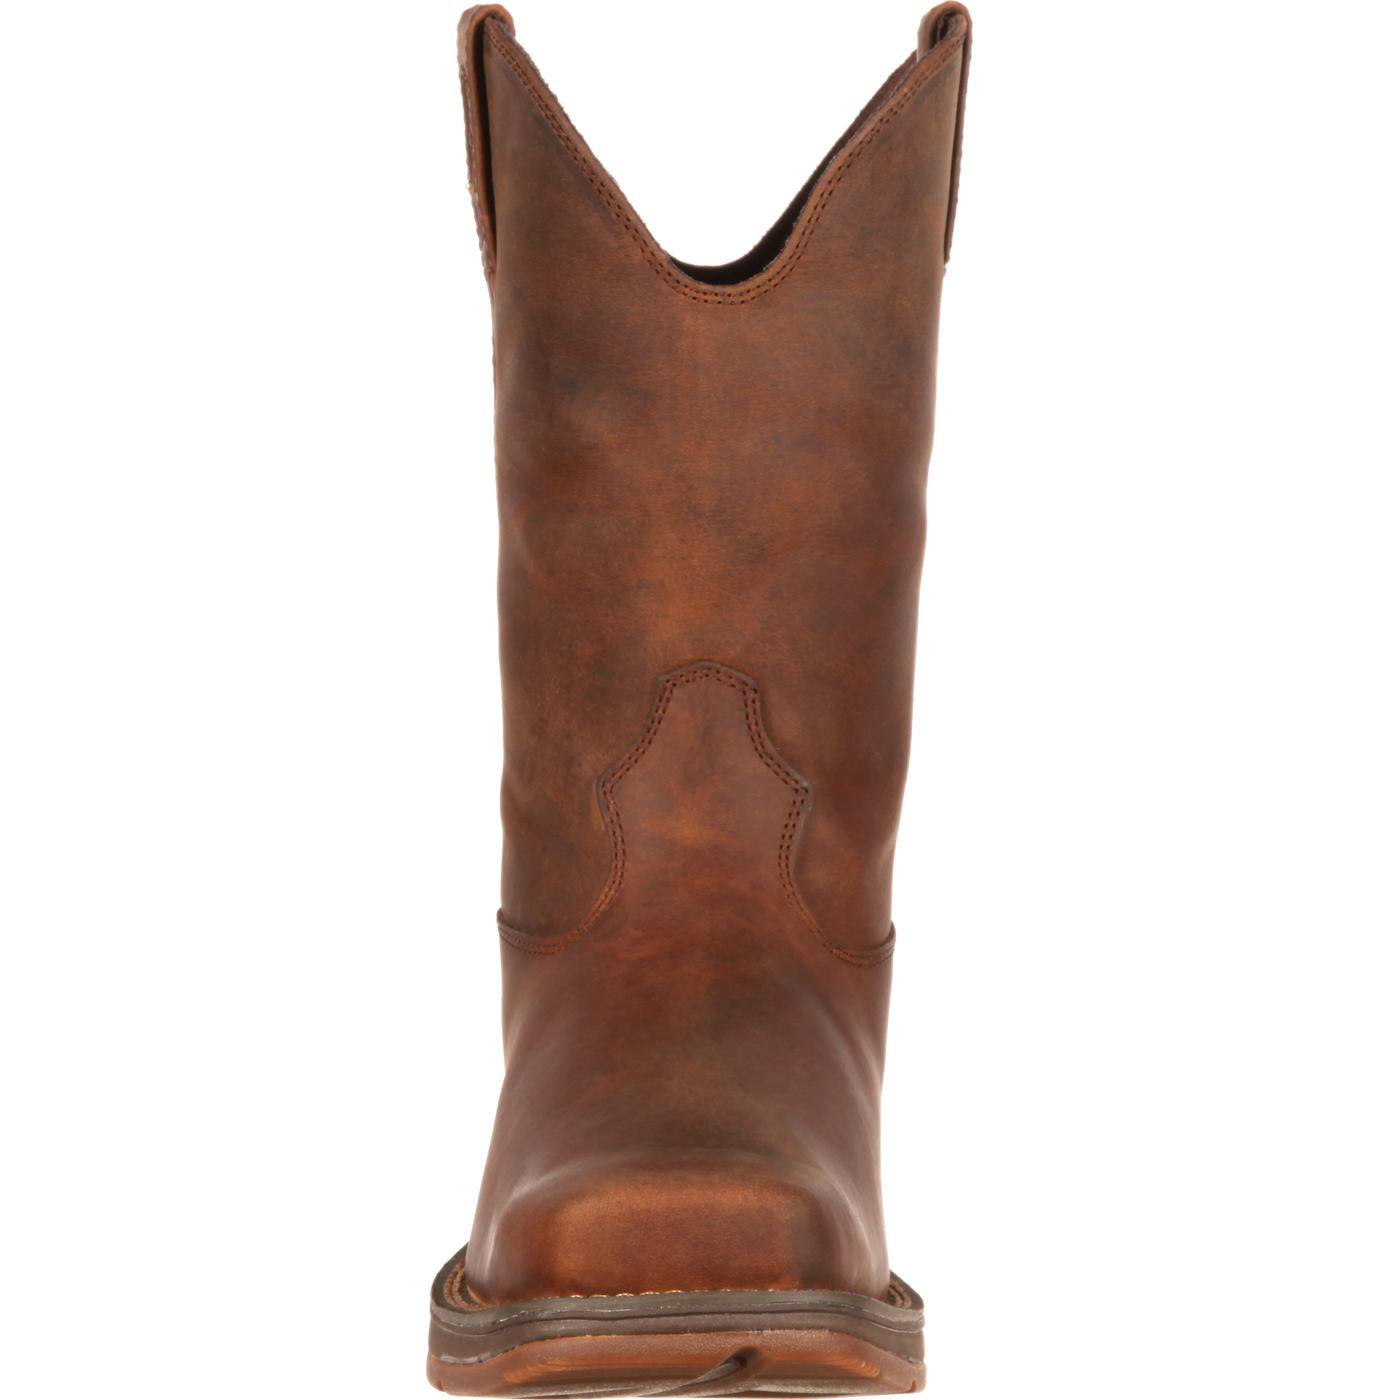 Rebel by Durango Pull-On Western Boot Shaft height and circumference may vary by 